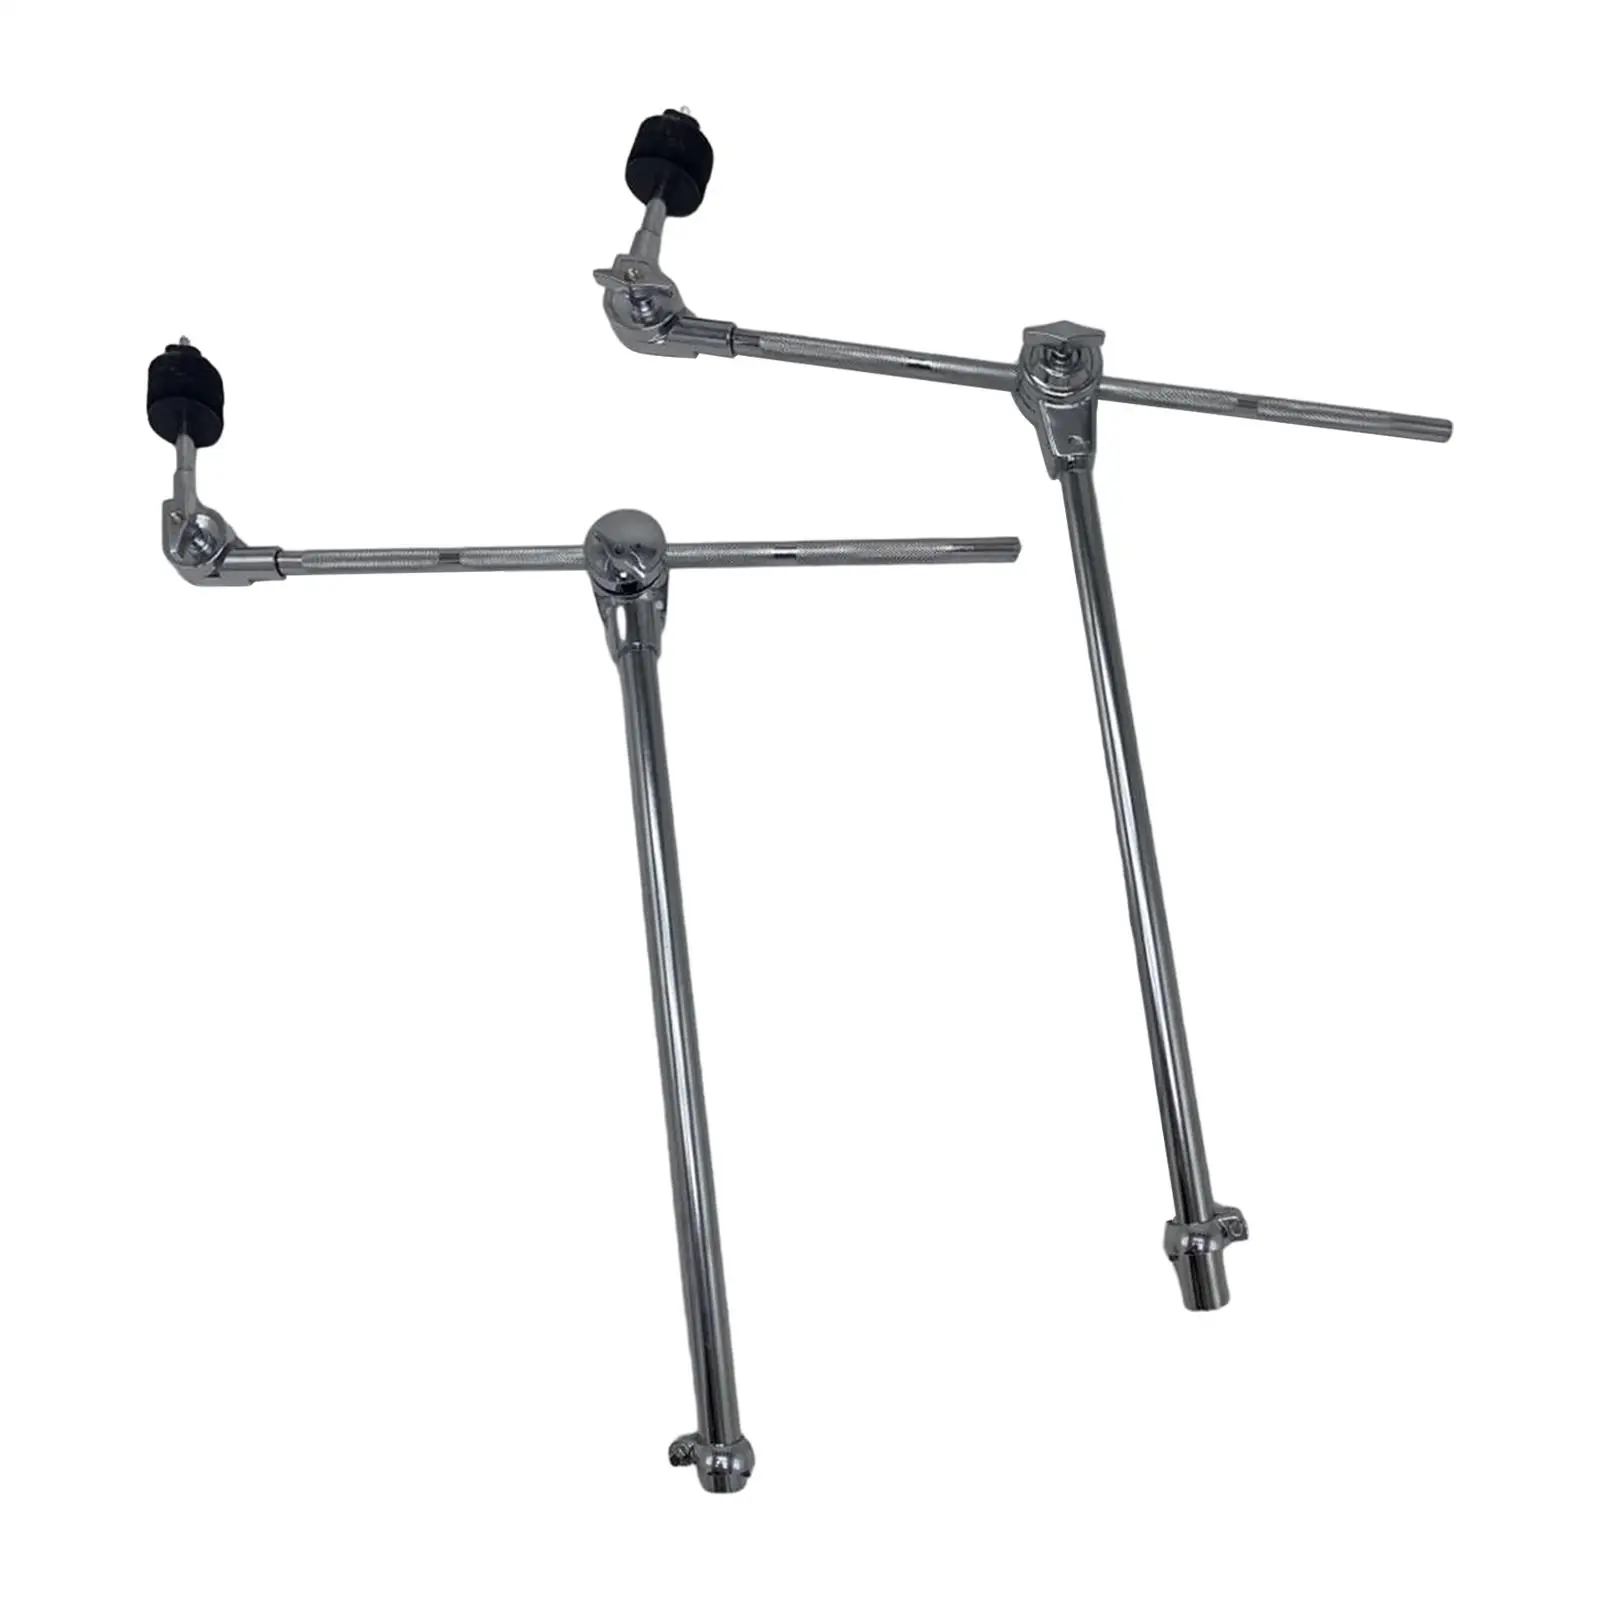 Cymbal Tilter Drum Accessory Extension Attachment Portable Cymbal Arm Stand Holder for Percussion Accessories Musical Instrument